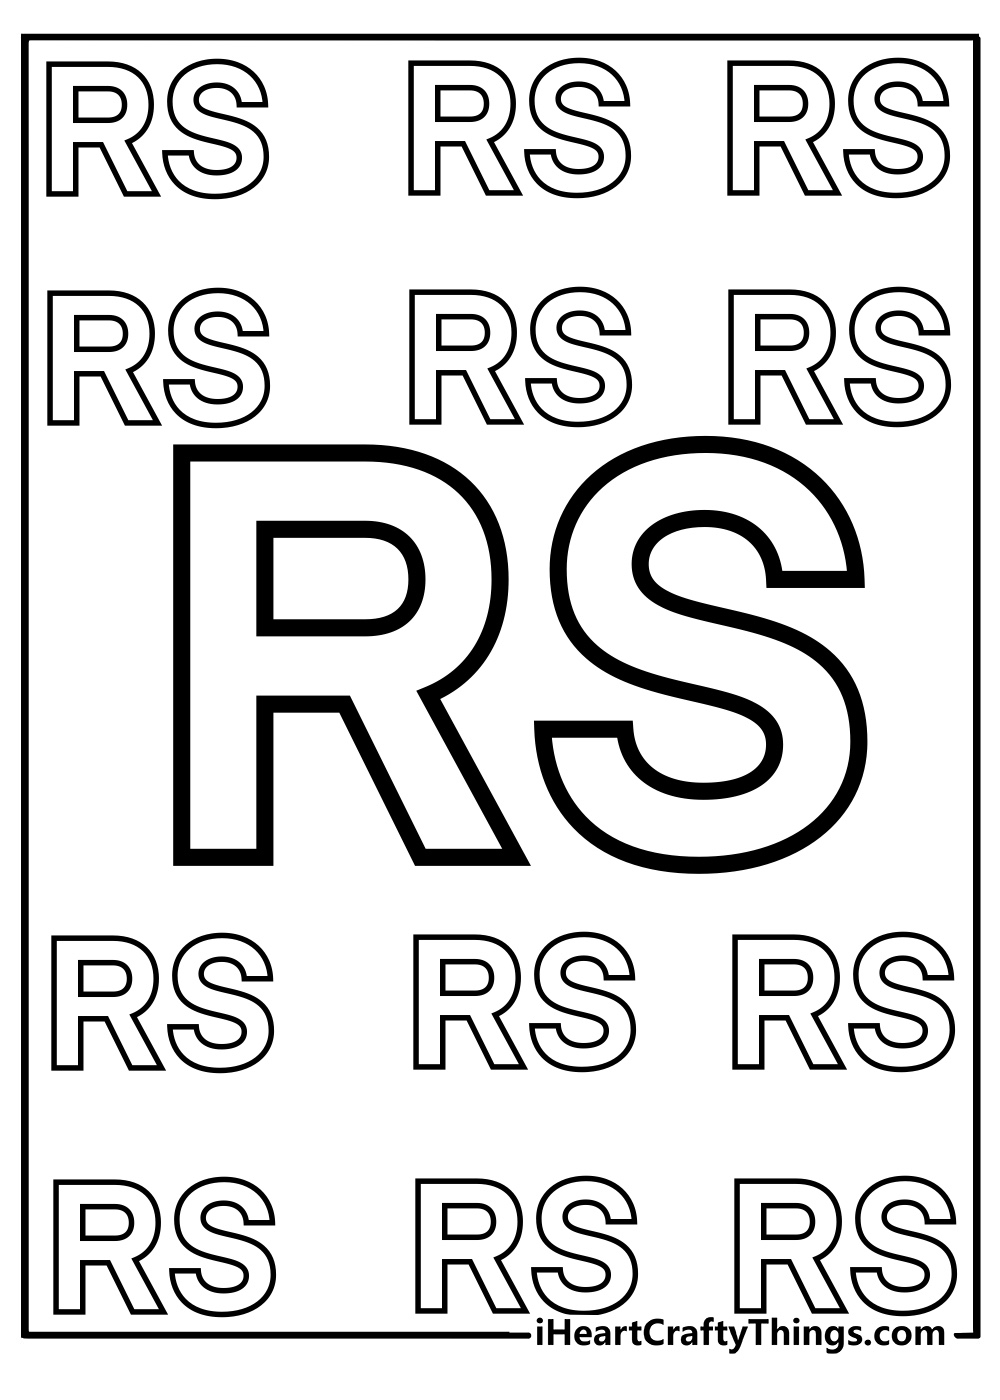 Lots of letters RS